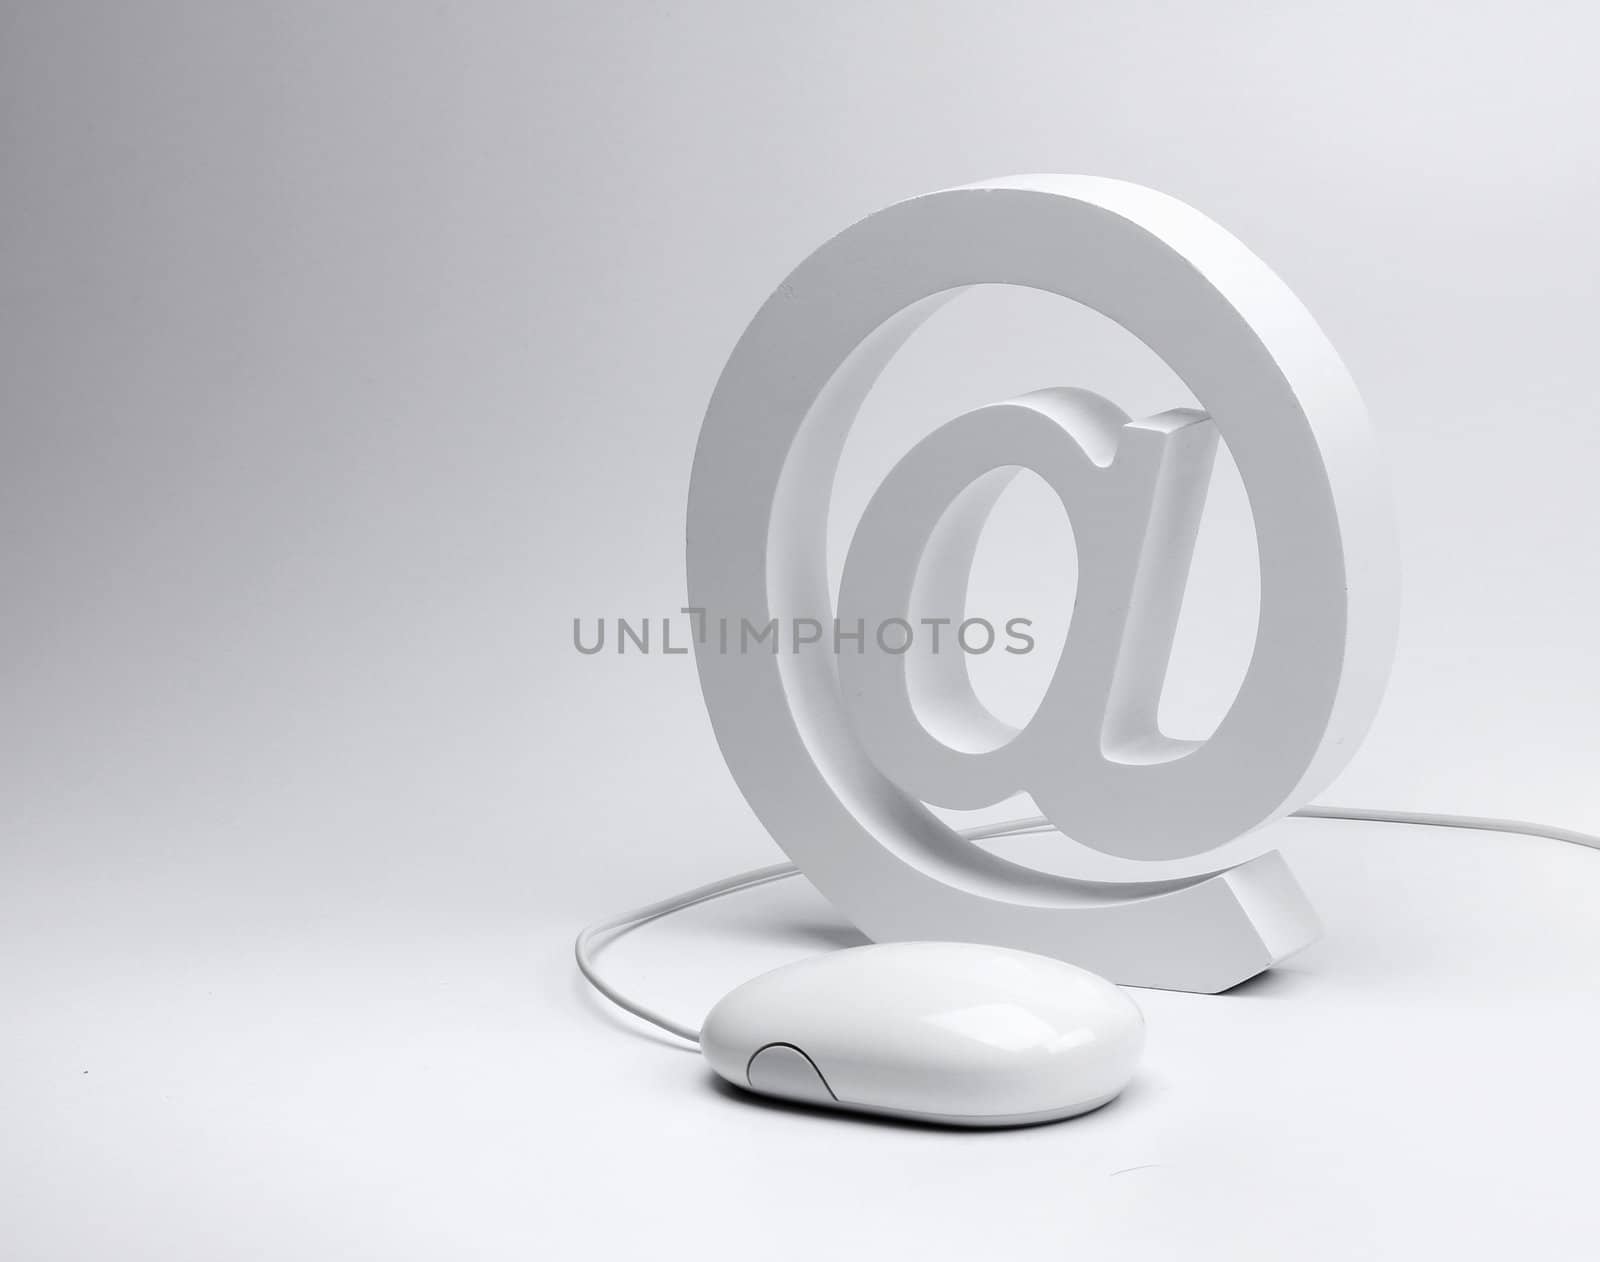 E-mail @ sign and computer mouse by anterovium